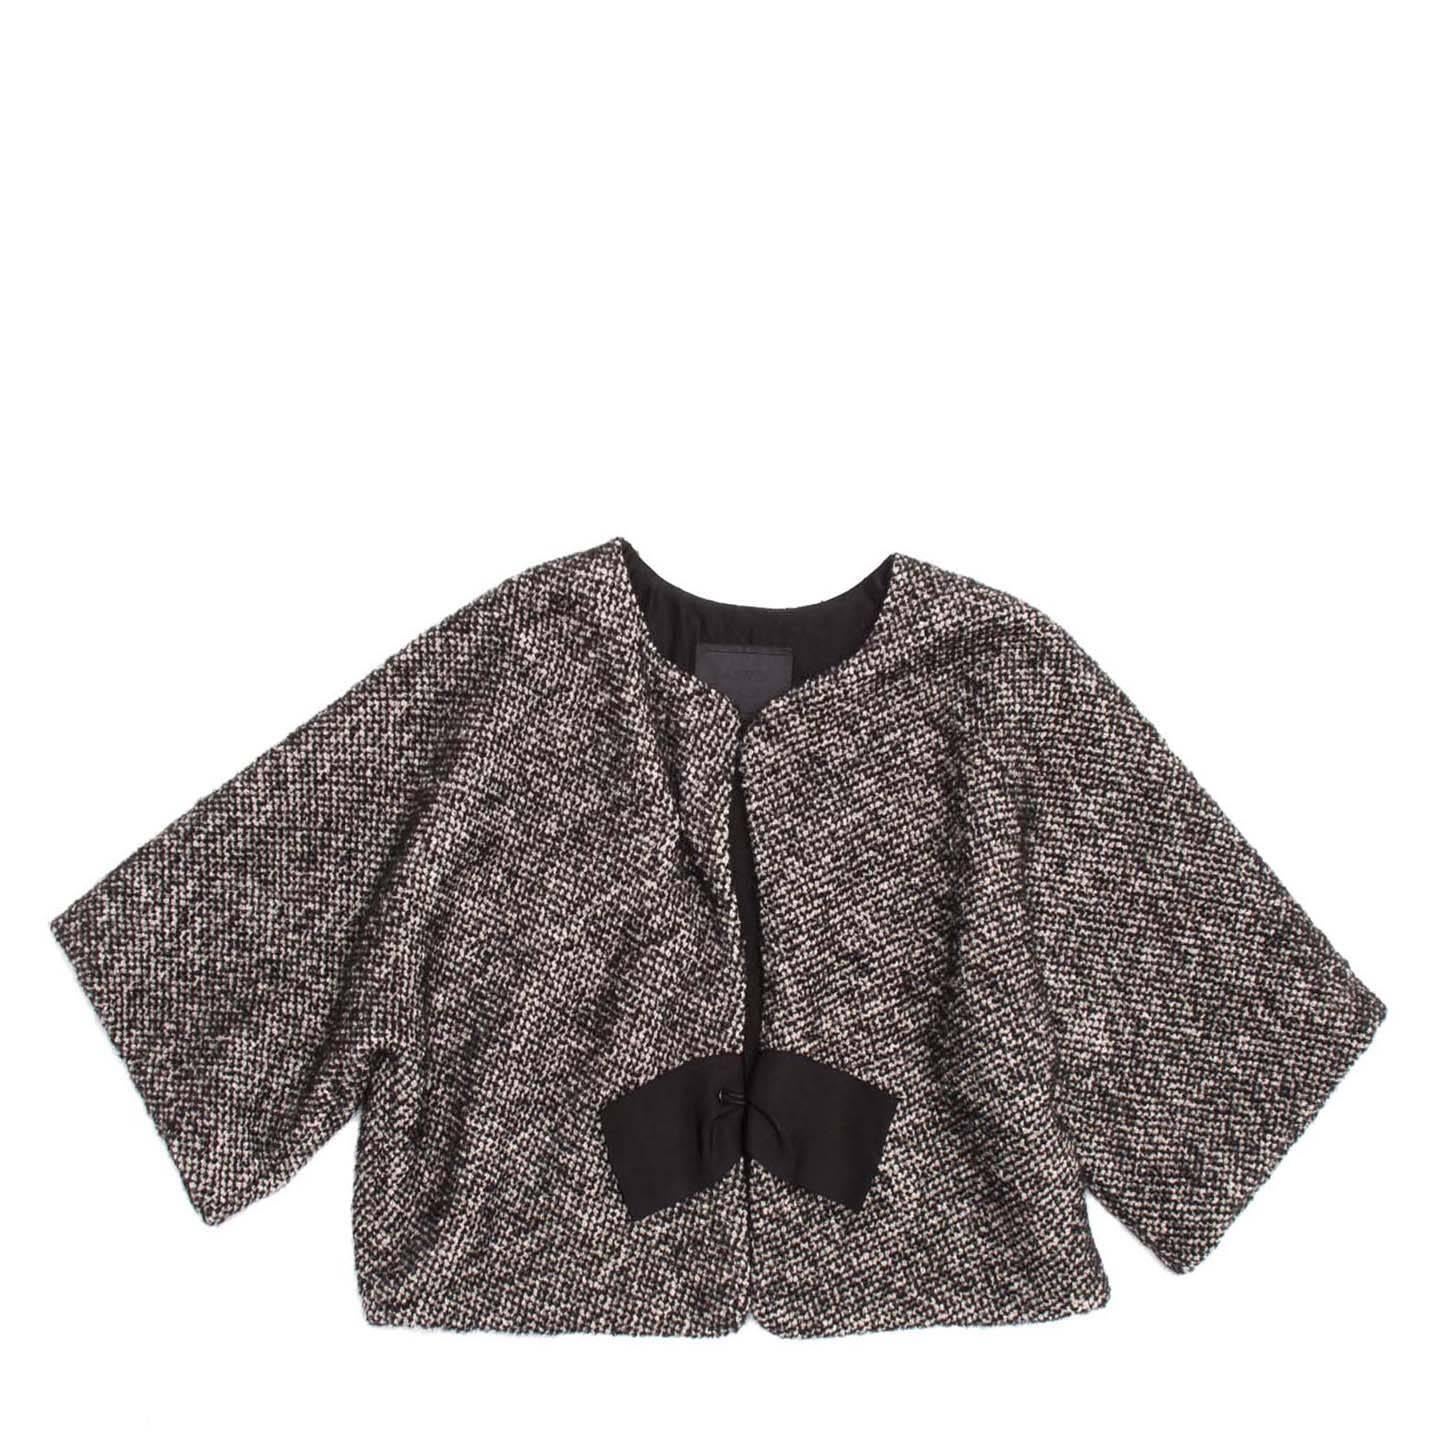 Lanvin 2008. Cropped flay-away black and grey tweed jacket with round neck. A black bow grosgrain ribbon embellishes the big hook closure and the kimono sleeves are 3/4 length.The outer layer is a bland of wool/alpaca/cotton/mohair and the black